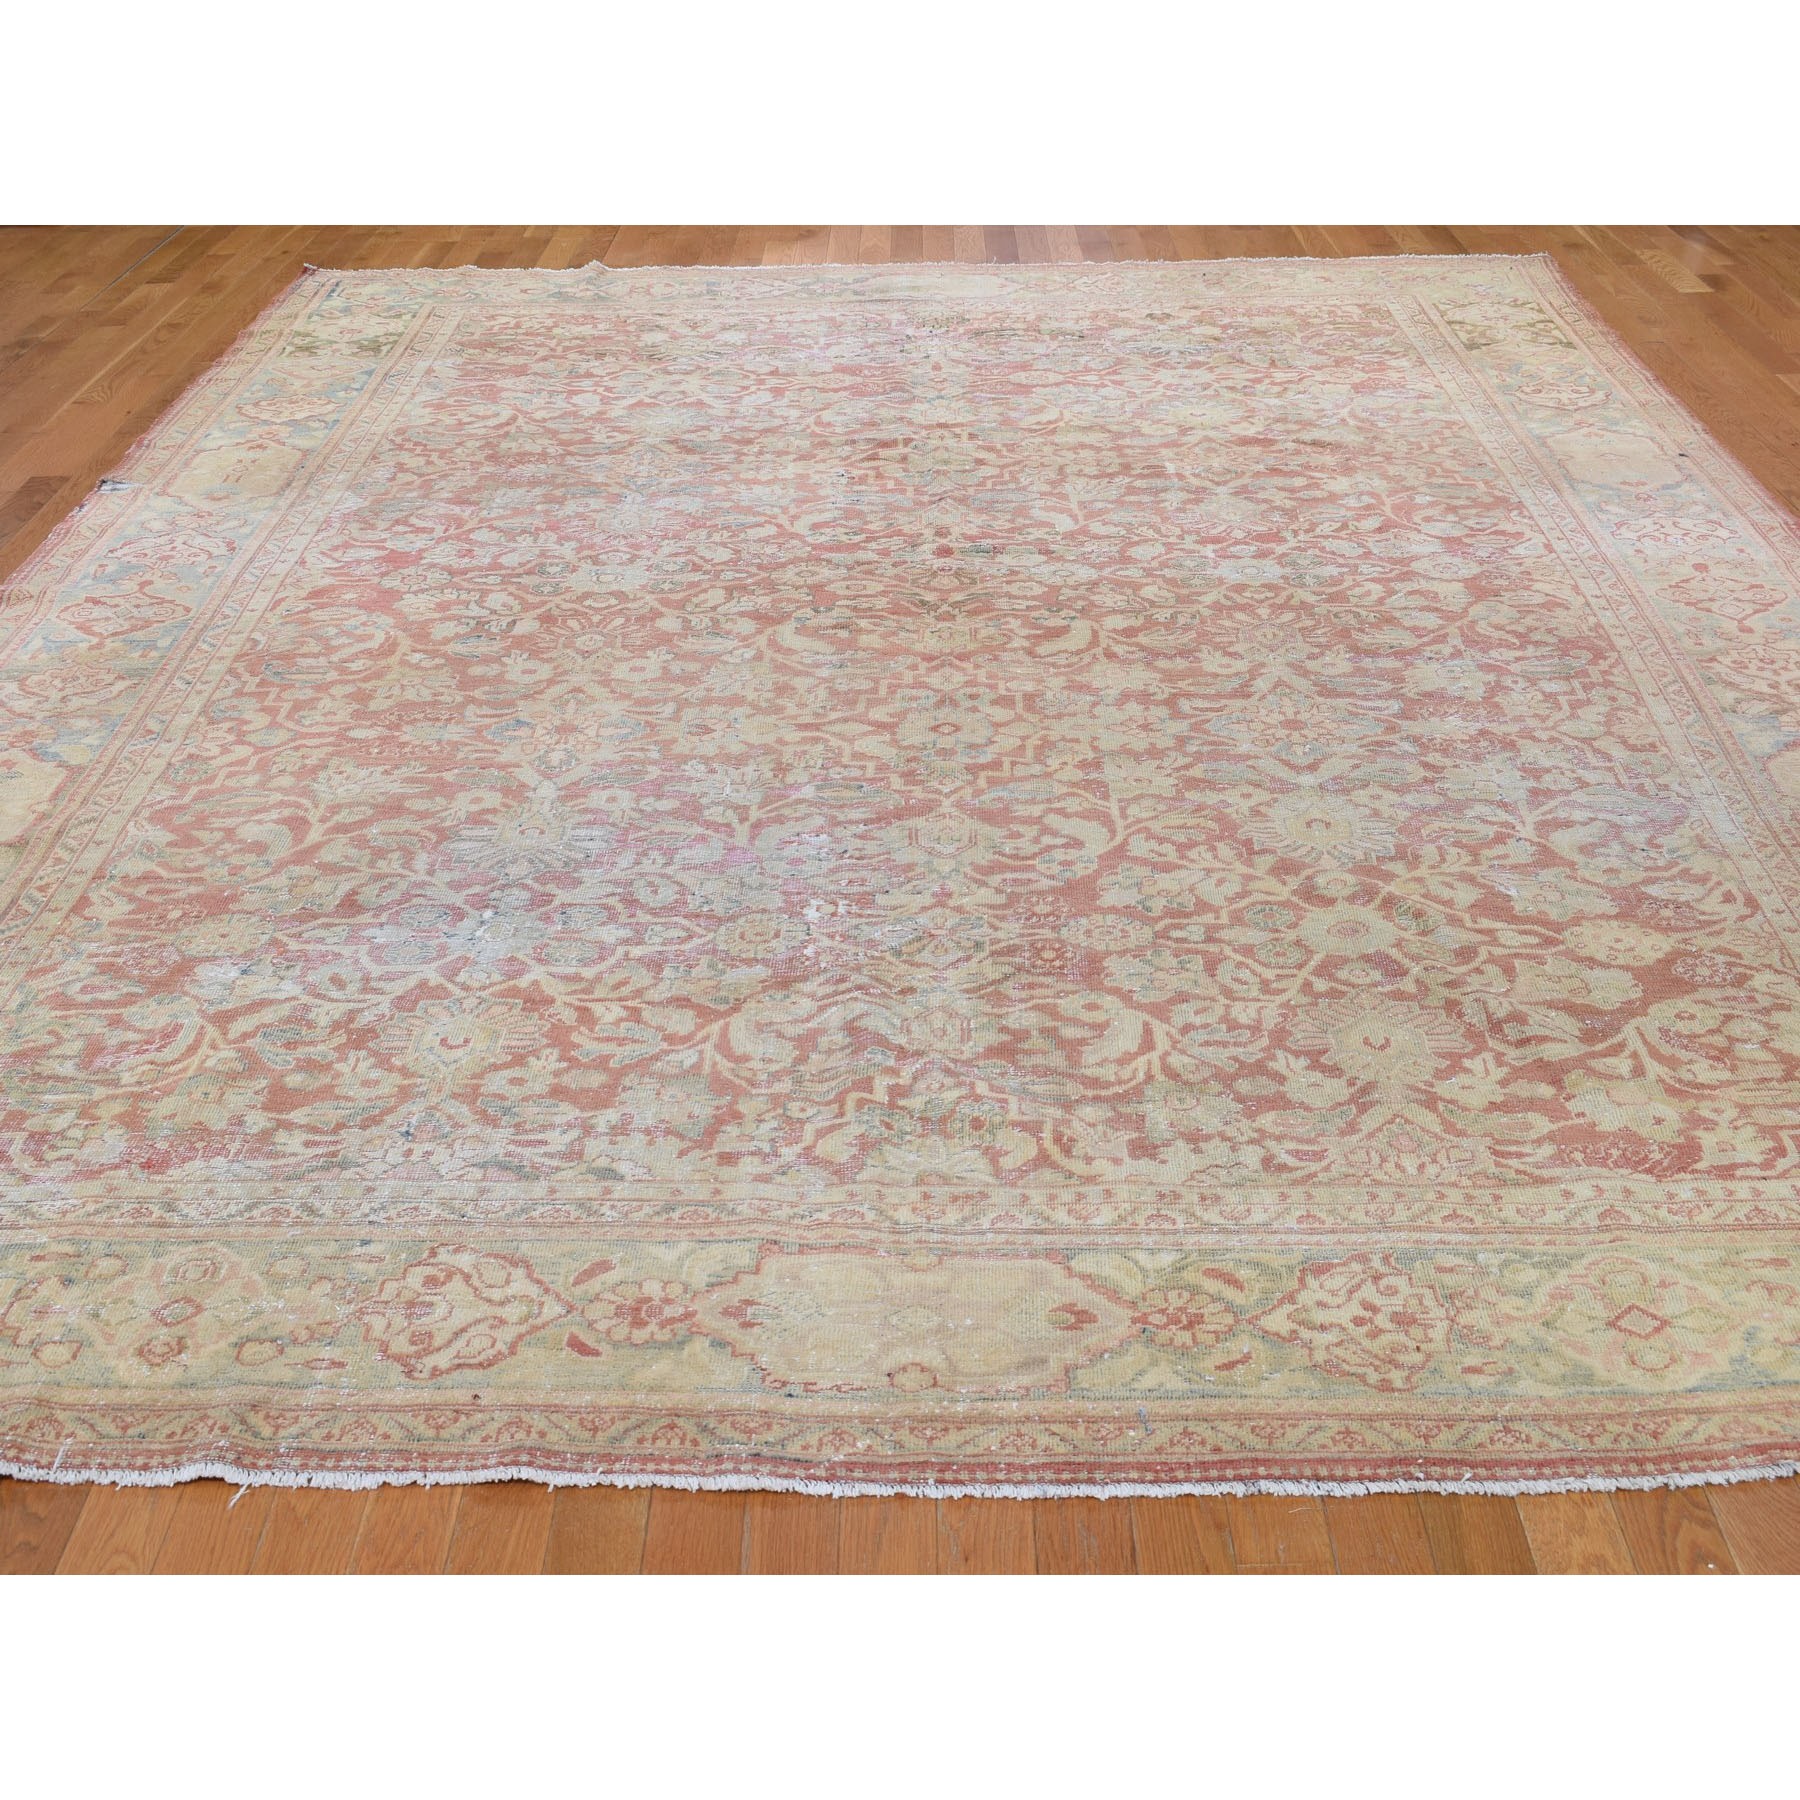 10-3 x13-8  Coral Antique And Worn Persian Mahal Hand Knotted Oriental Rug 